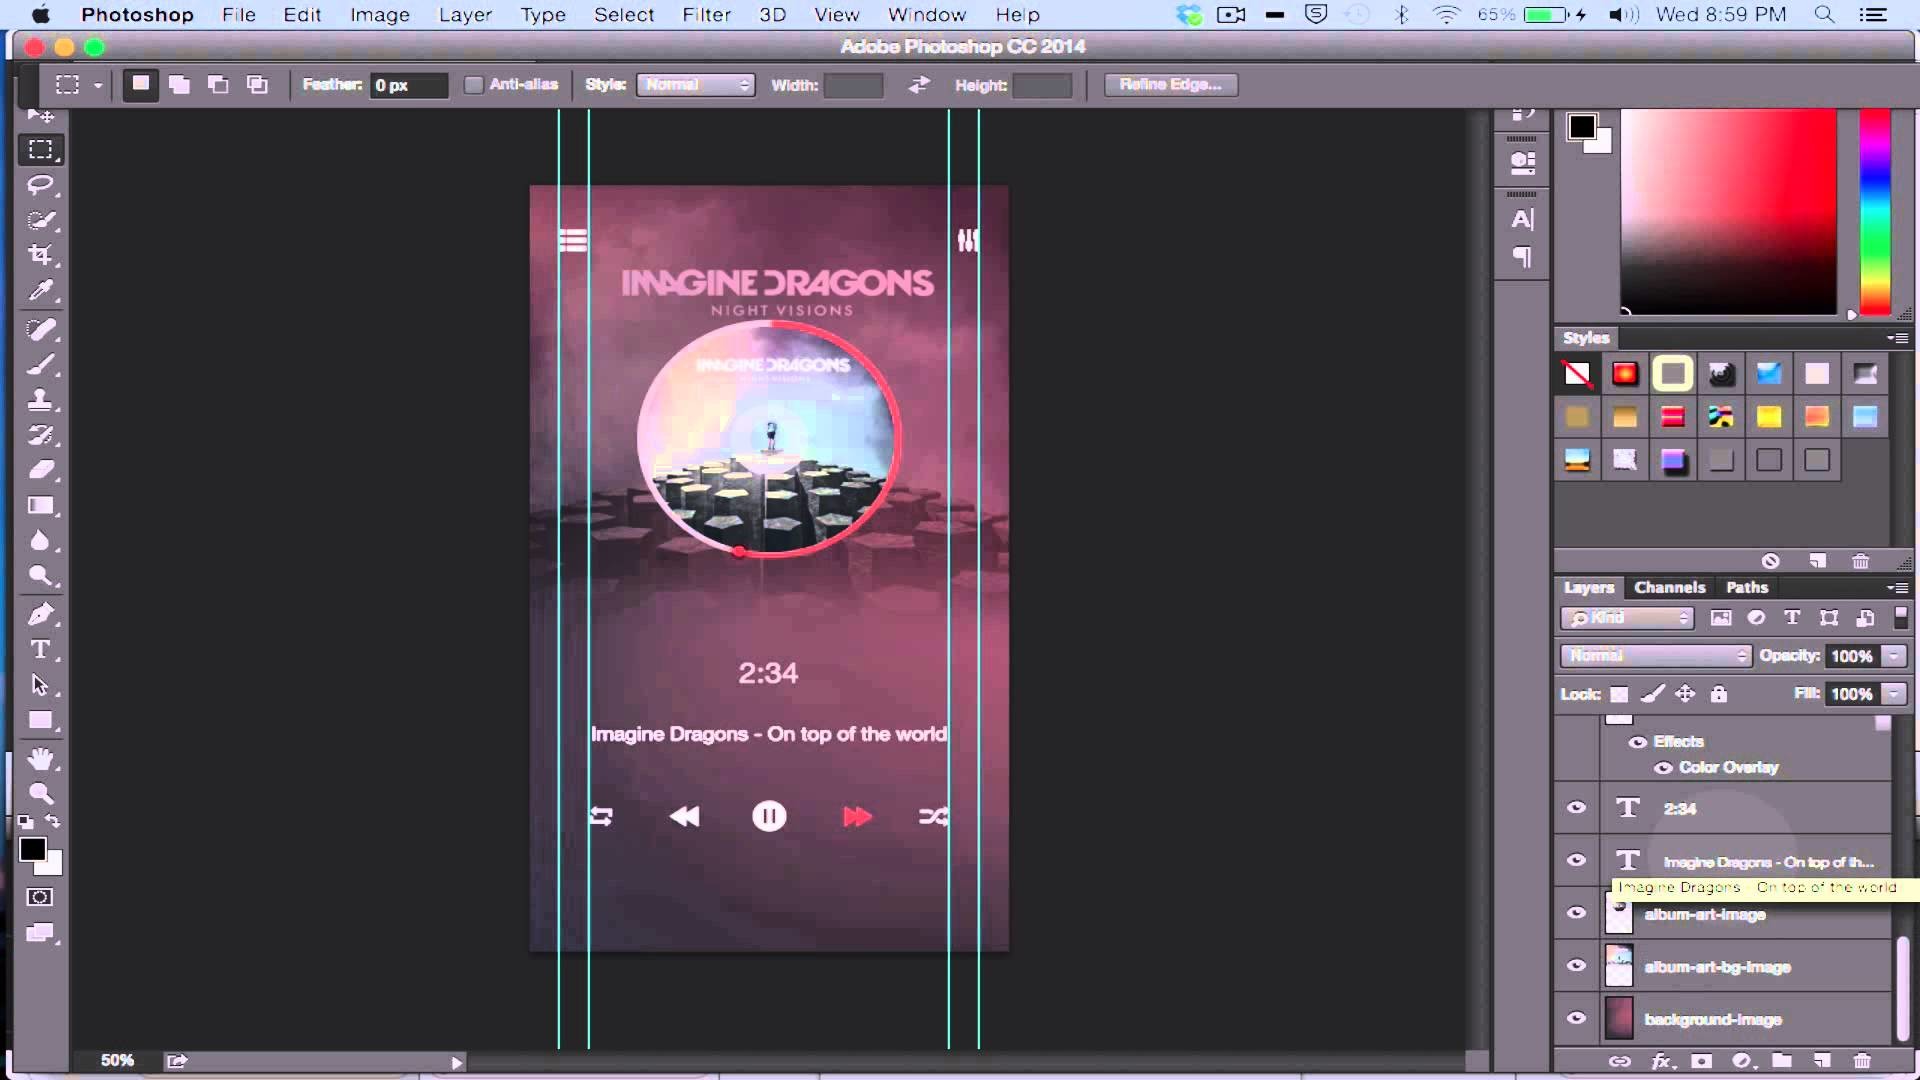 1920x1080 PSD to Xcode - Easily convert Photoshop designs to an executable iOS Xcode  project - YouTube